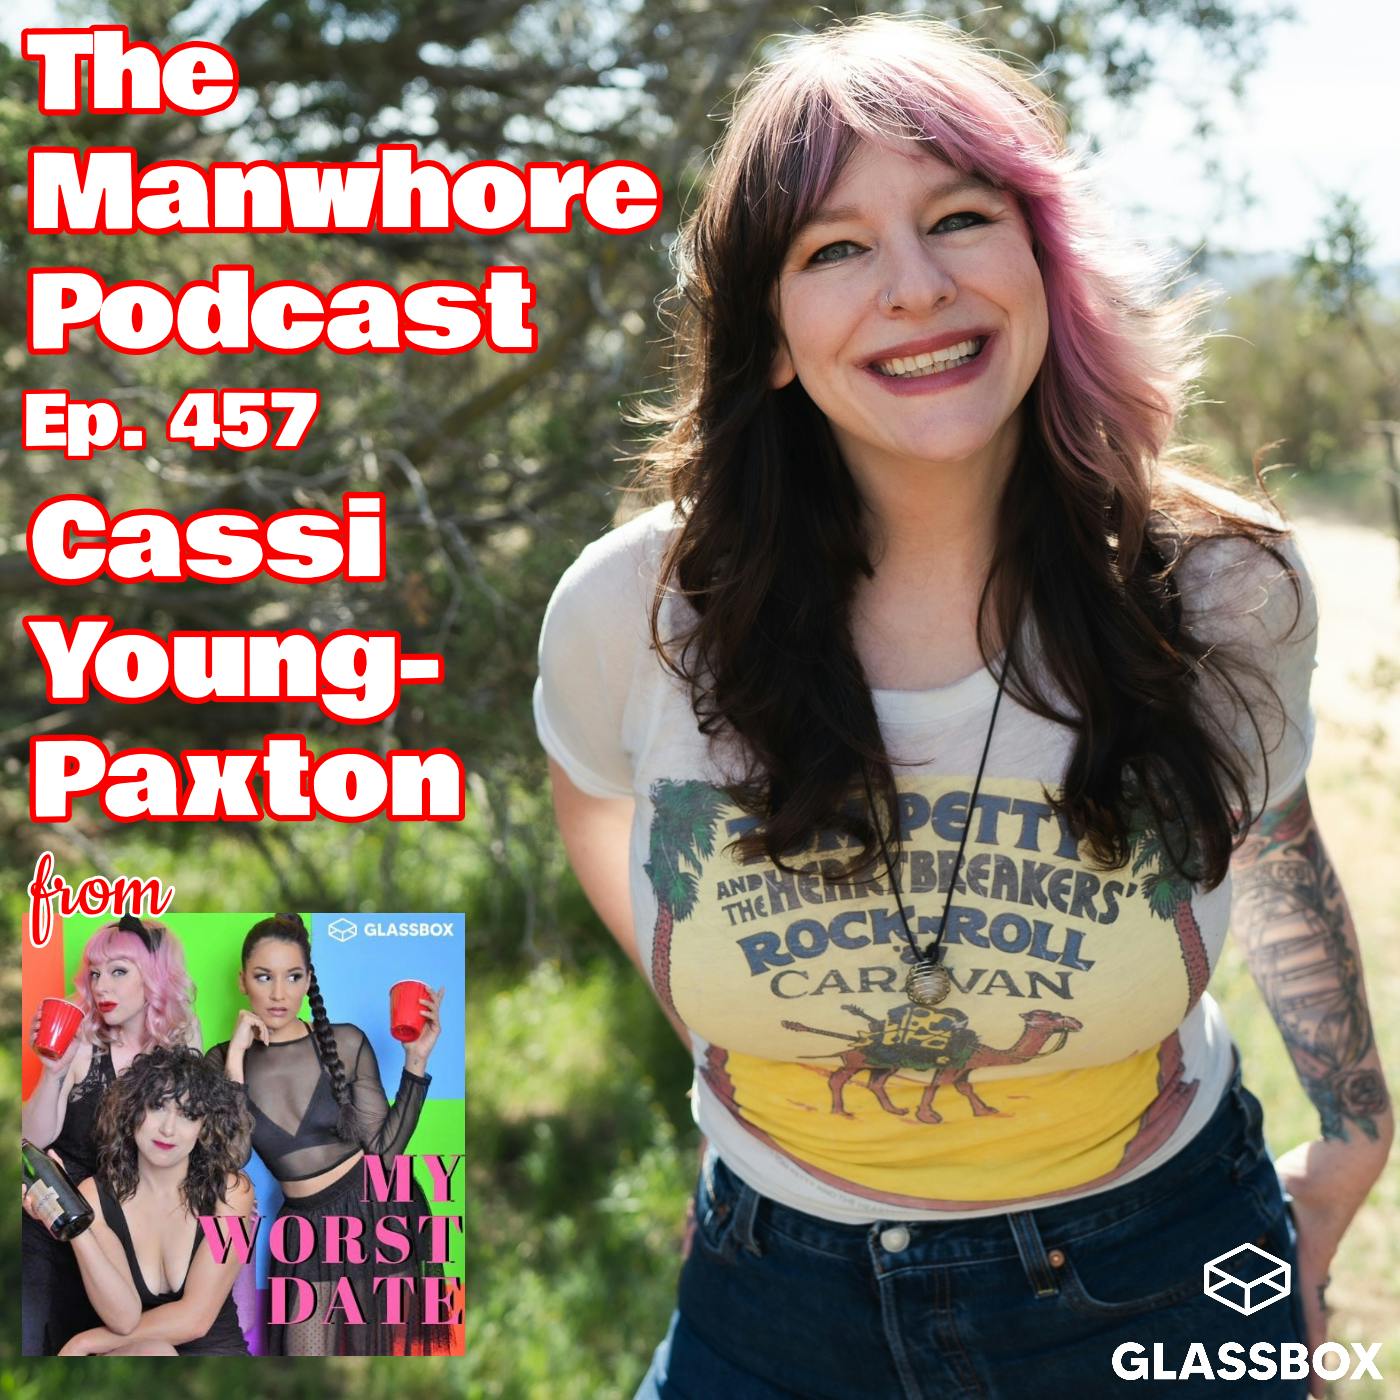 The Manwhore Podcast: A Sex-Positive Quest - Ep. 457: Teen Mom on Prom Night with Cassi Young-Paxton